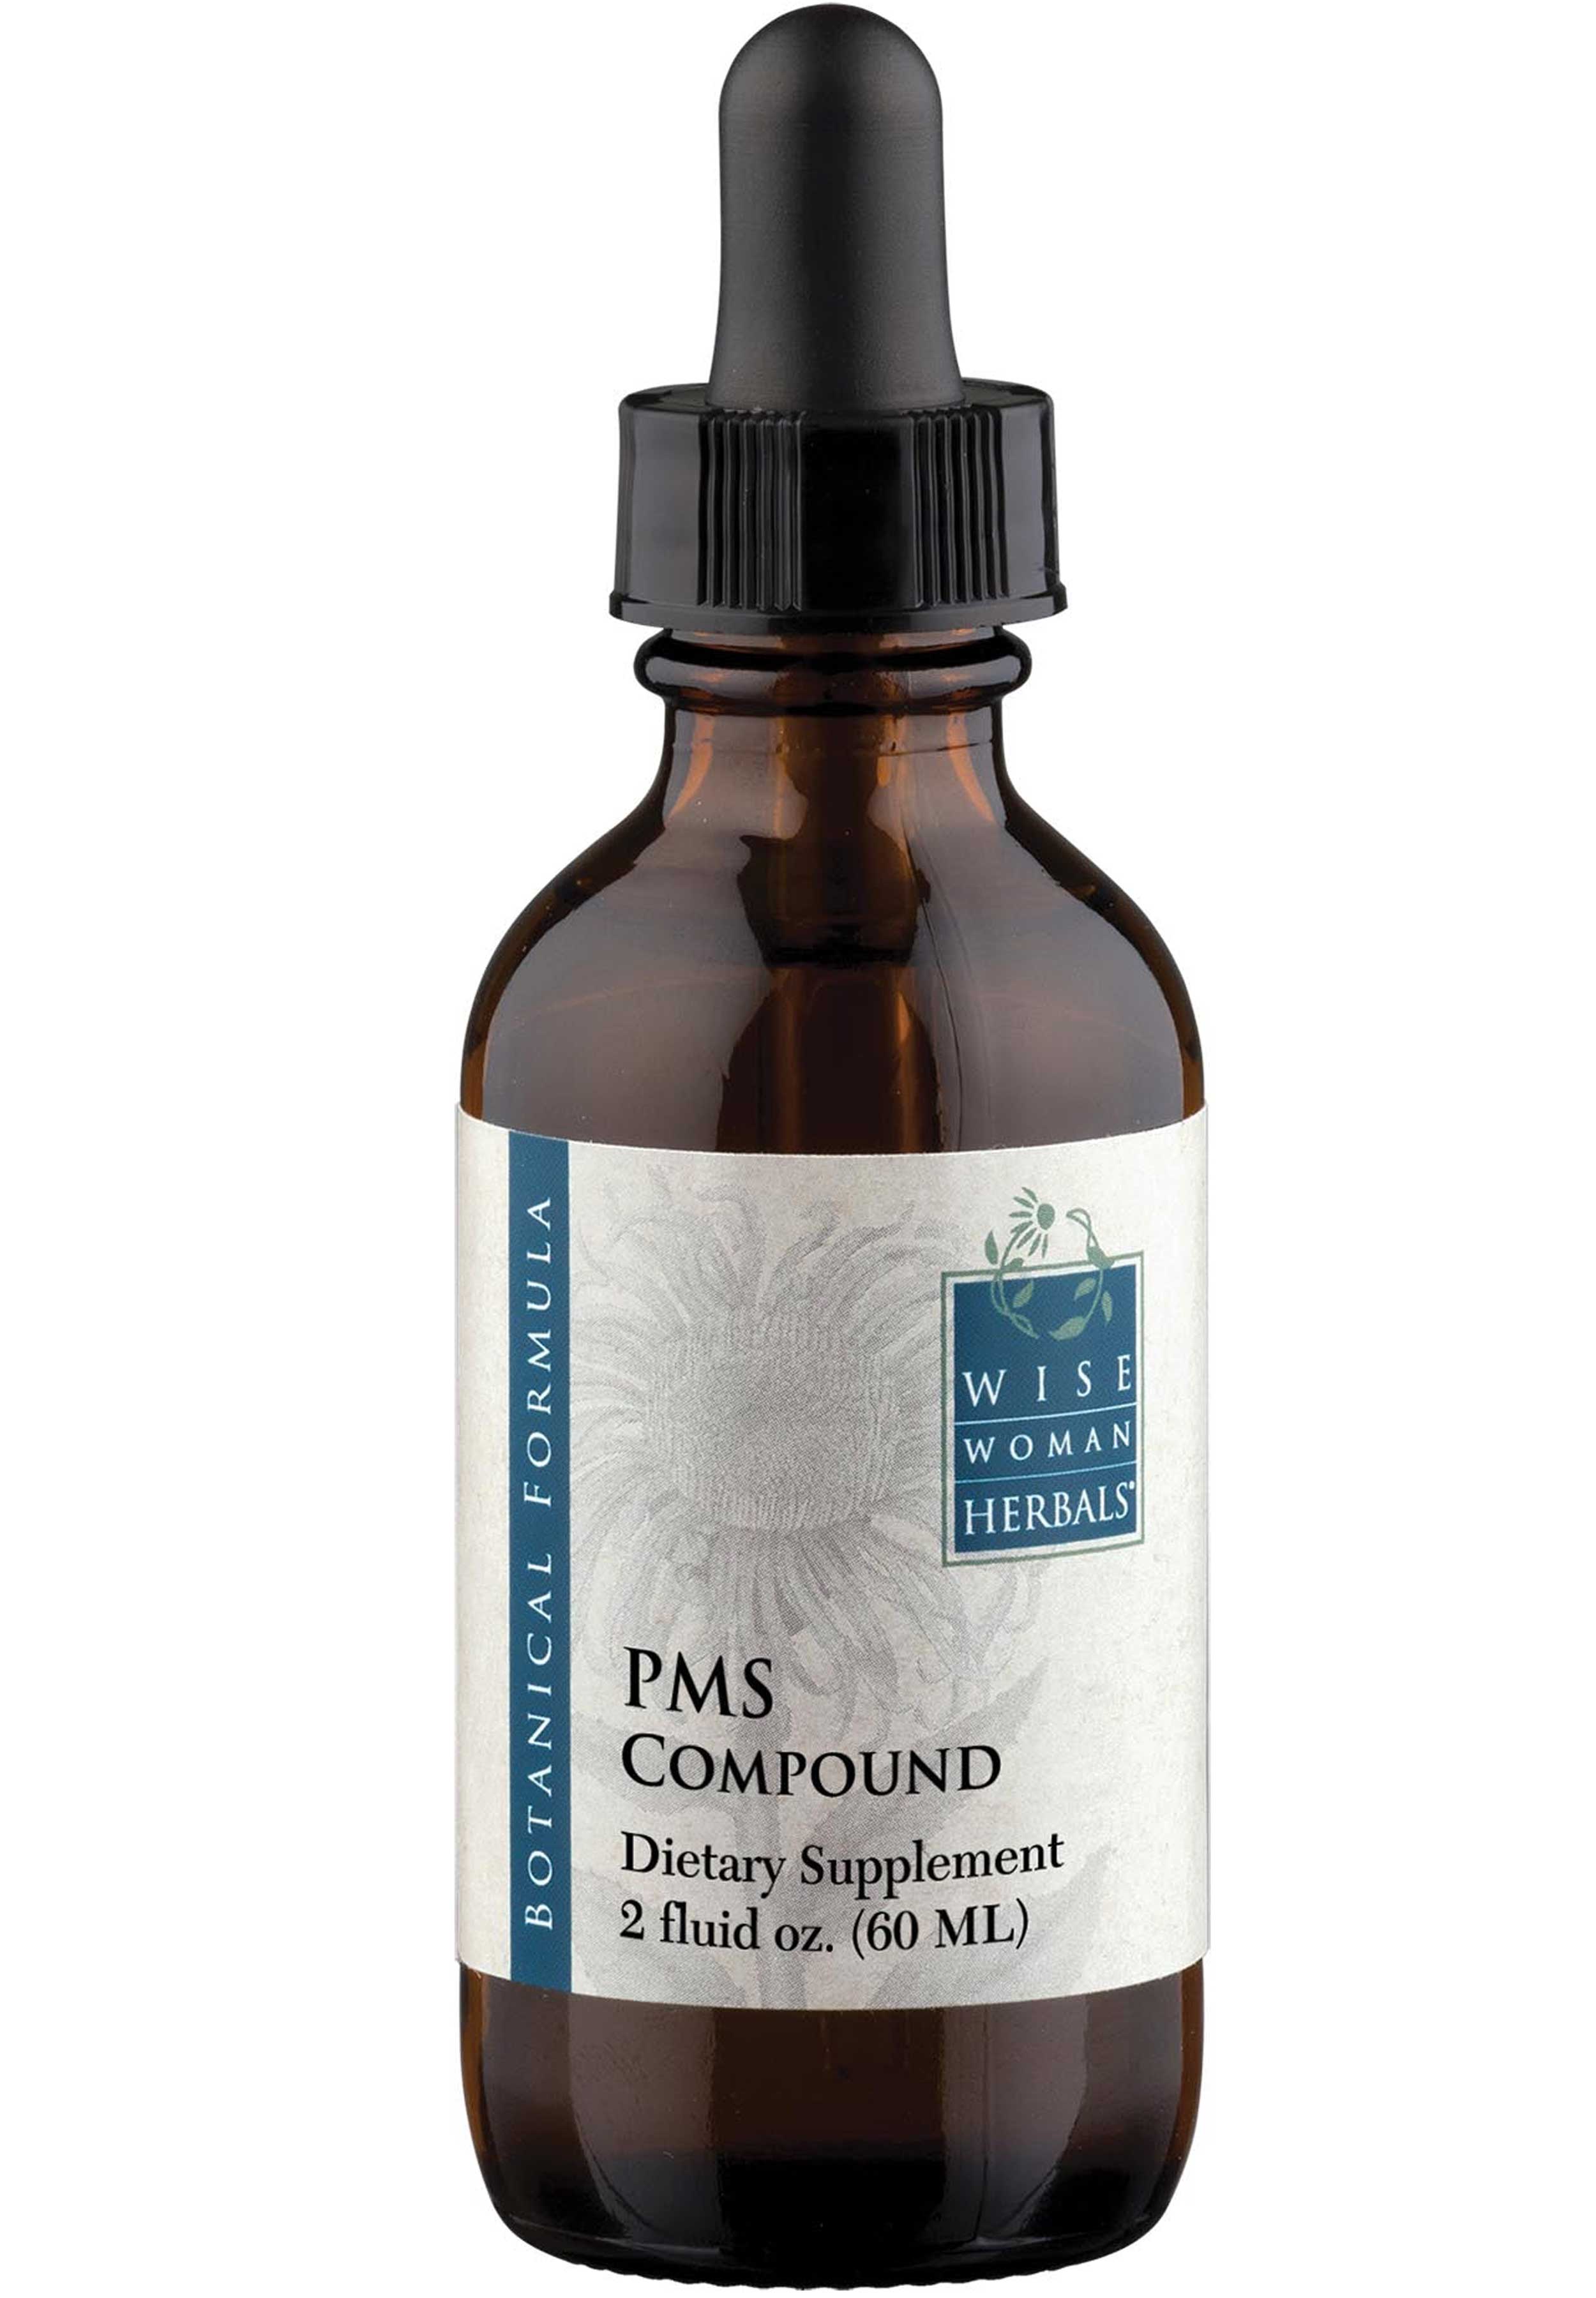 Wise Woman Herbals PMS Compound